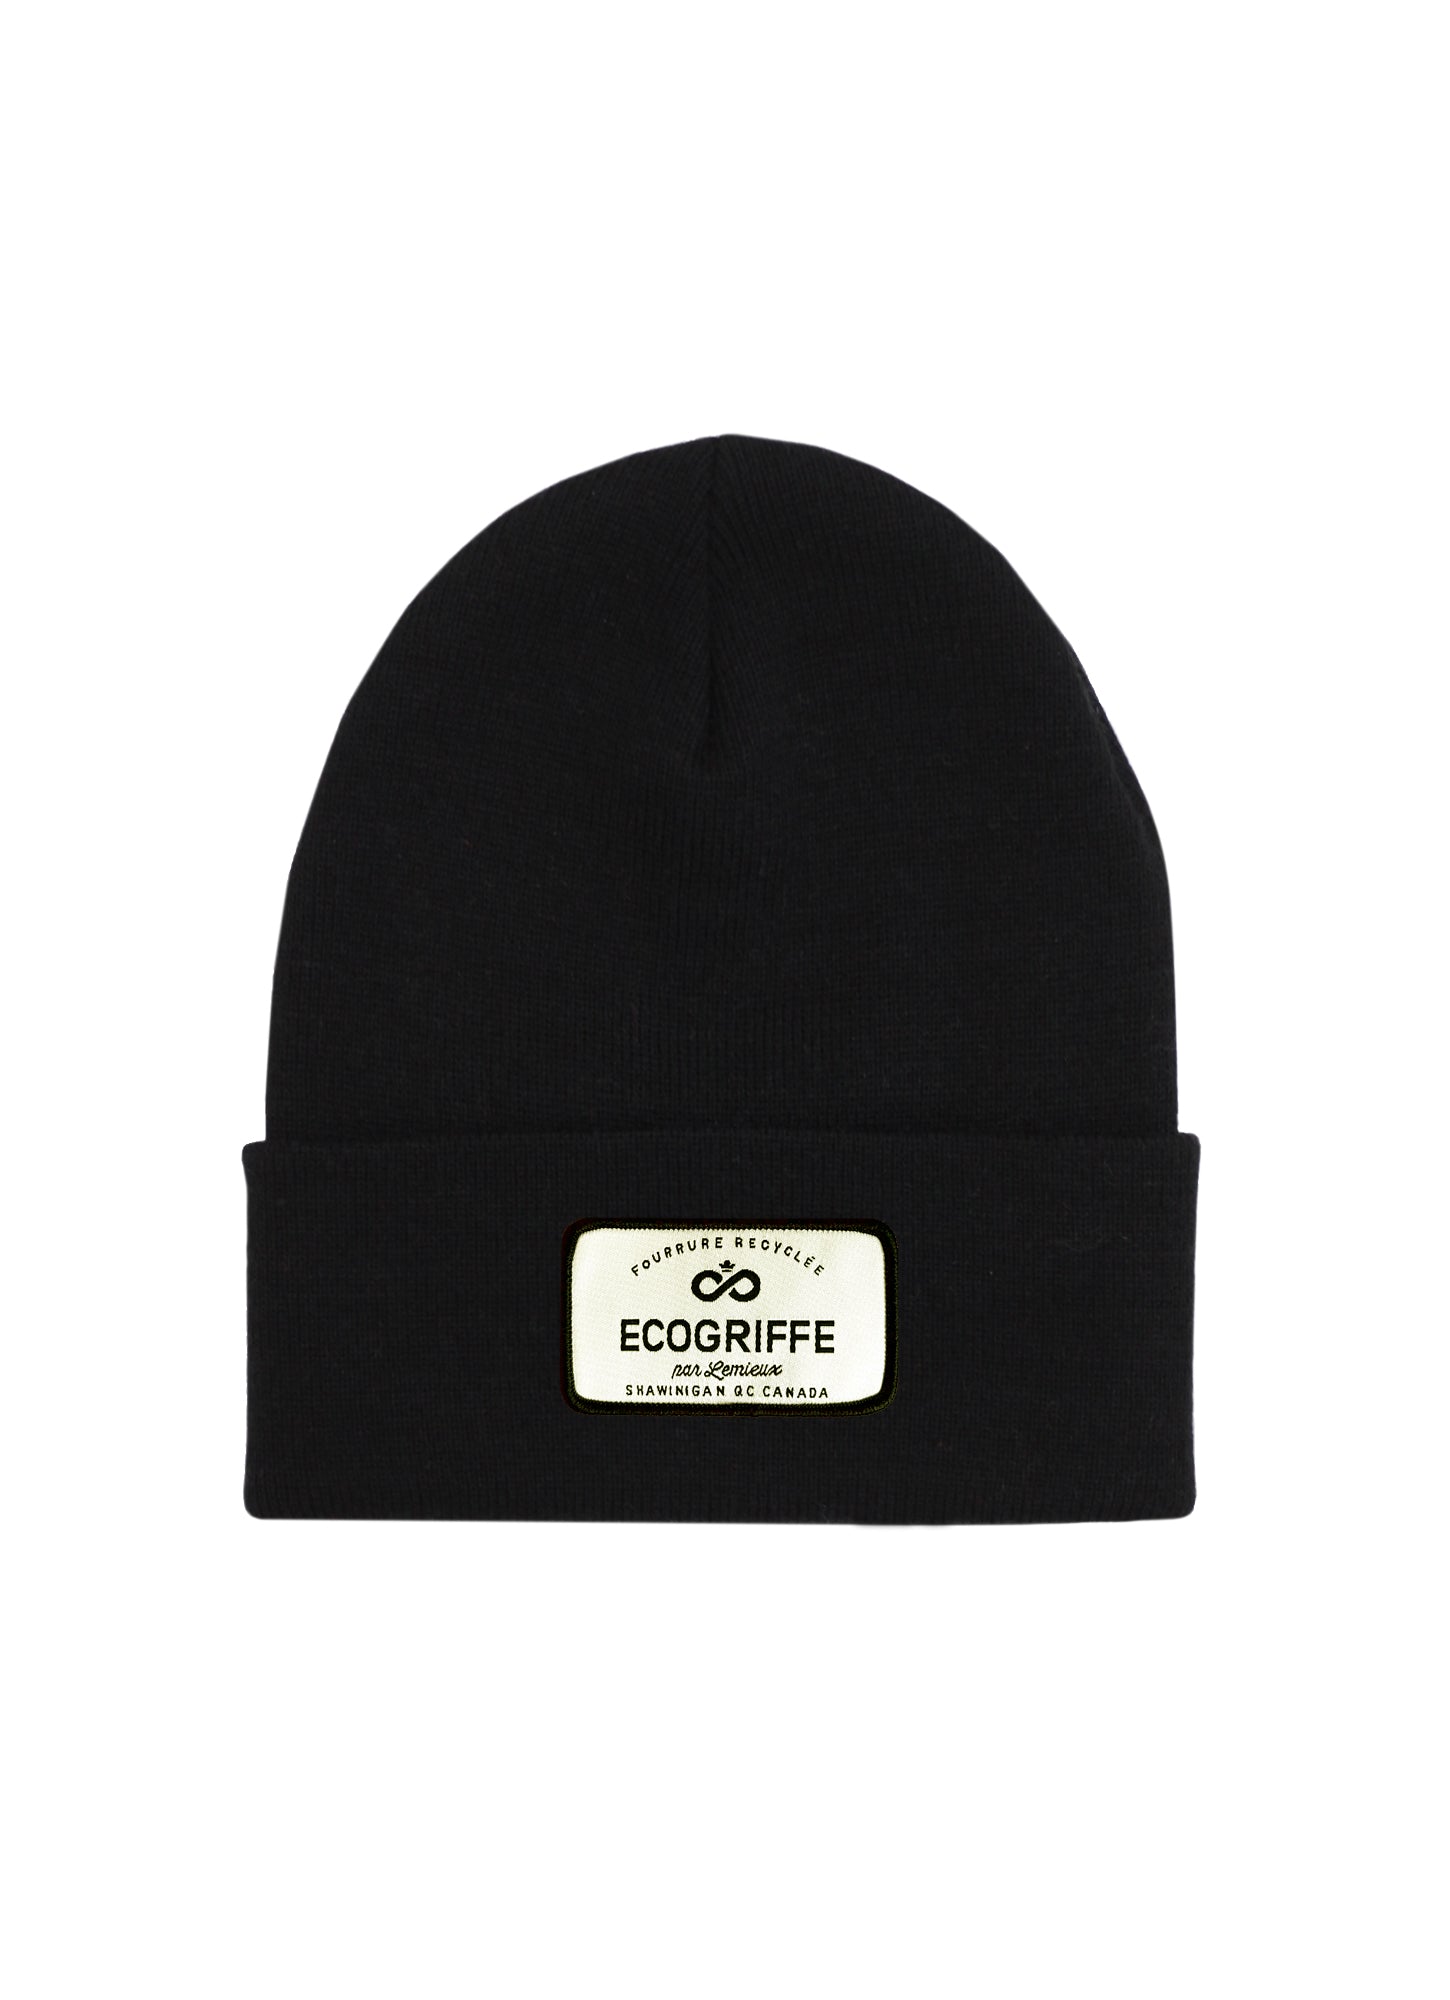 Tuque noire Tradition - taille adulte